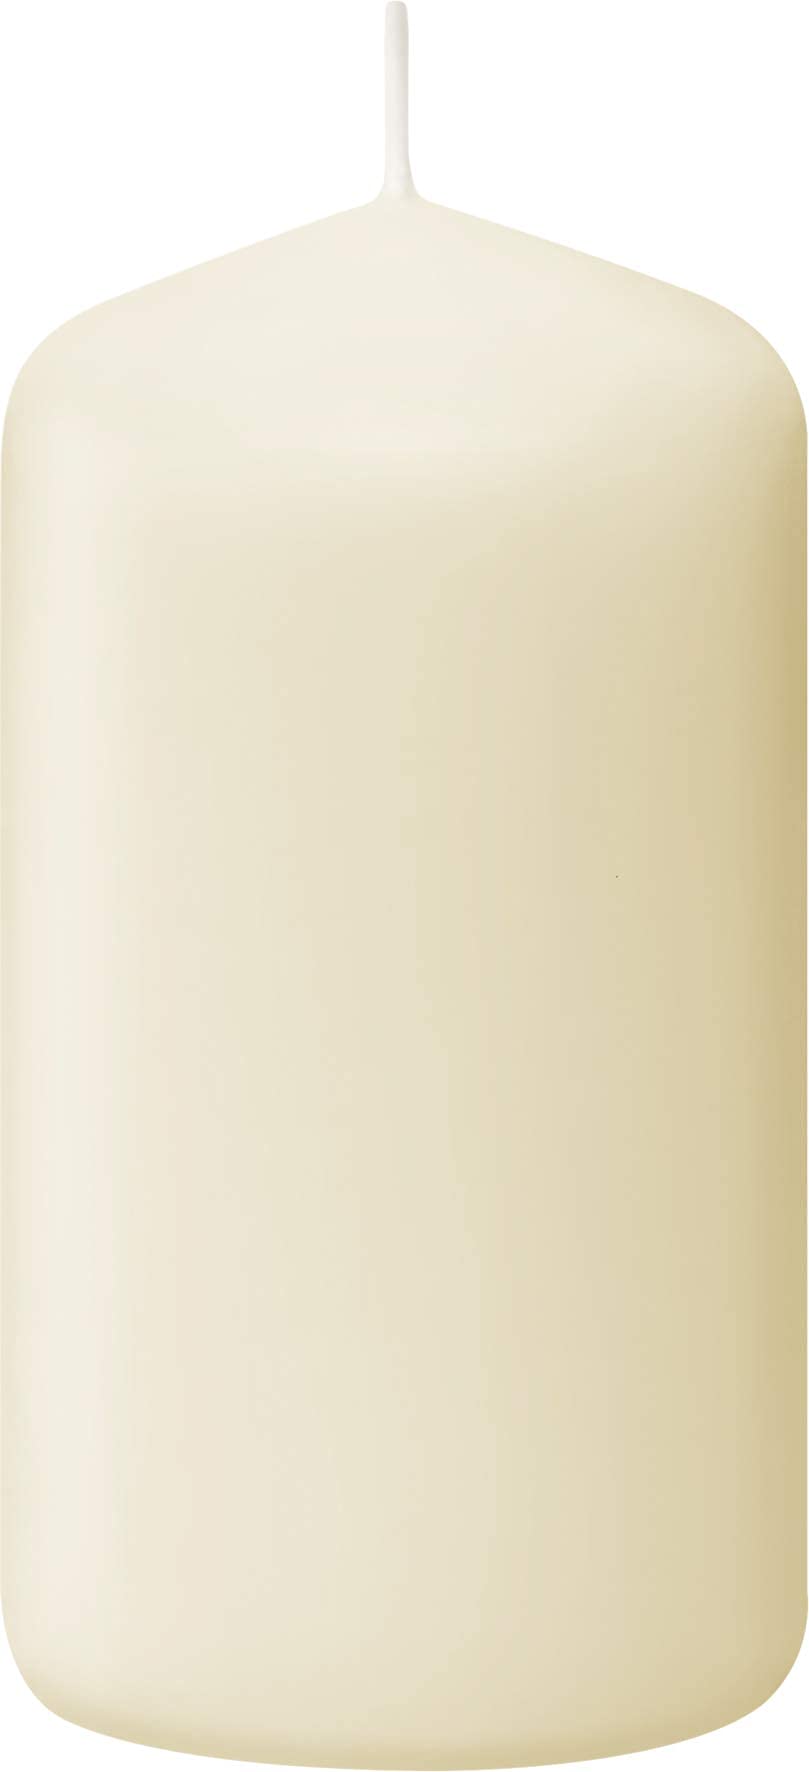 BOLSIUS Set of 20 Ivory Pillar Candles - Unscented Candle Set - Dripless Clean Burning Smokeless Dinner Candle - Perfect for Wedding Candles, Parties and Special Occasions  - Acceptable